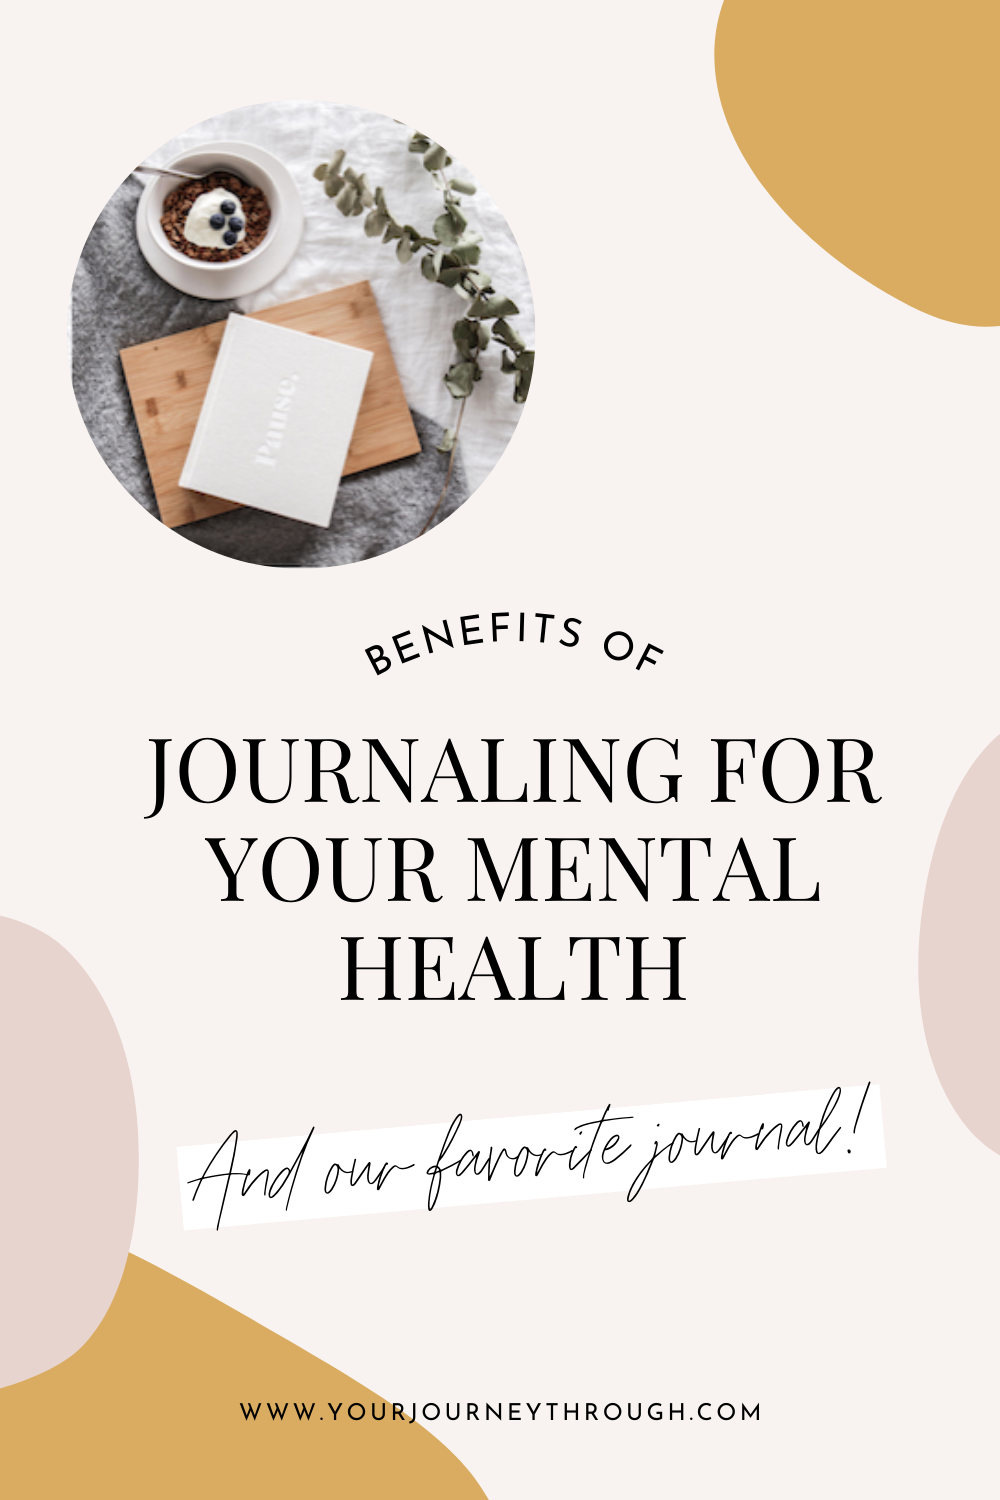 5 Benefits of Journaling for Mental Health